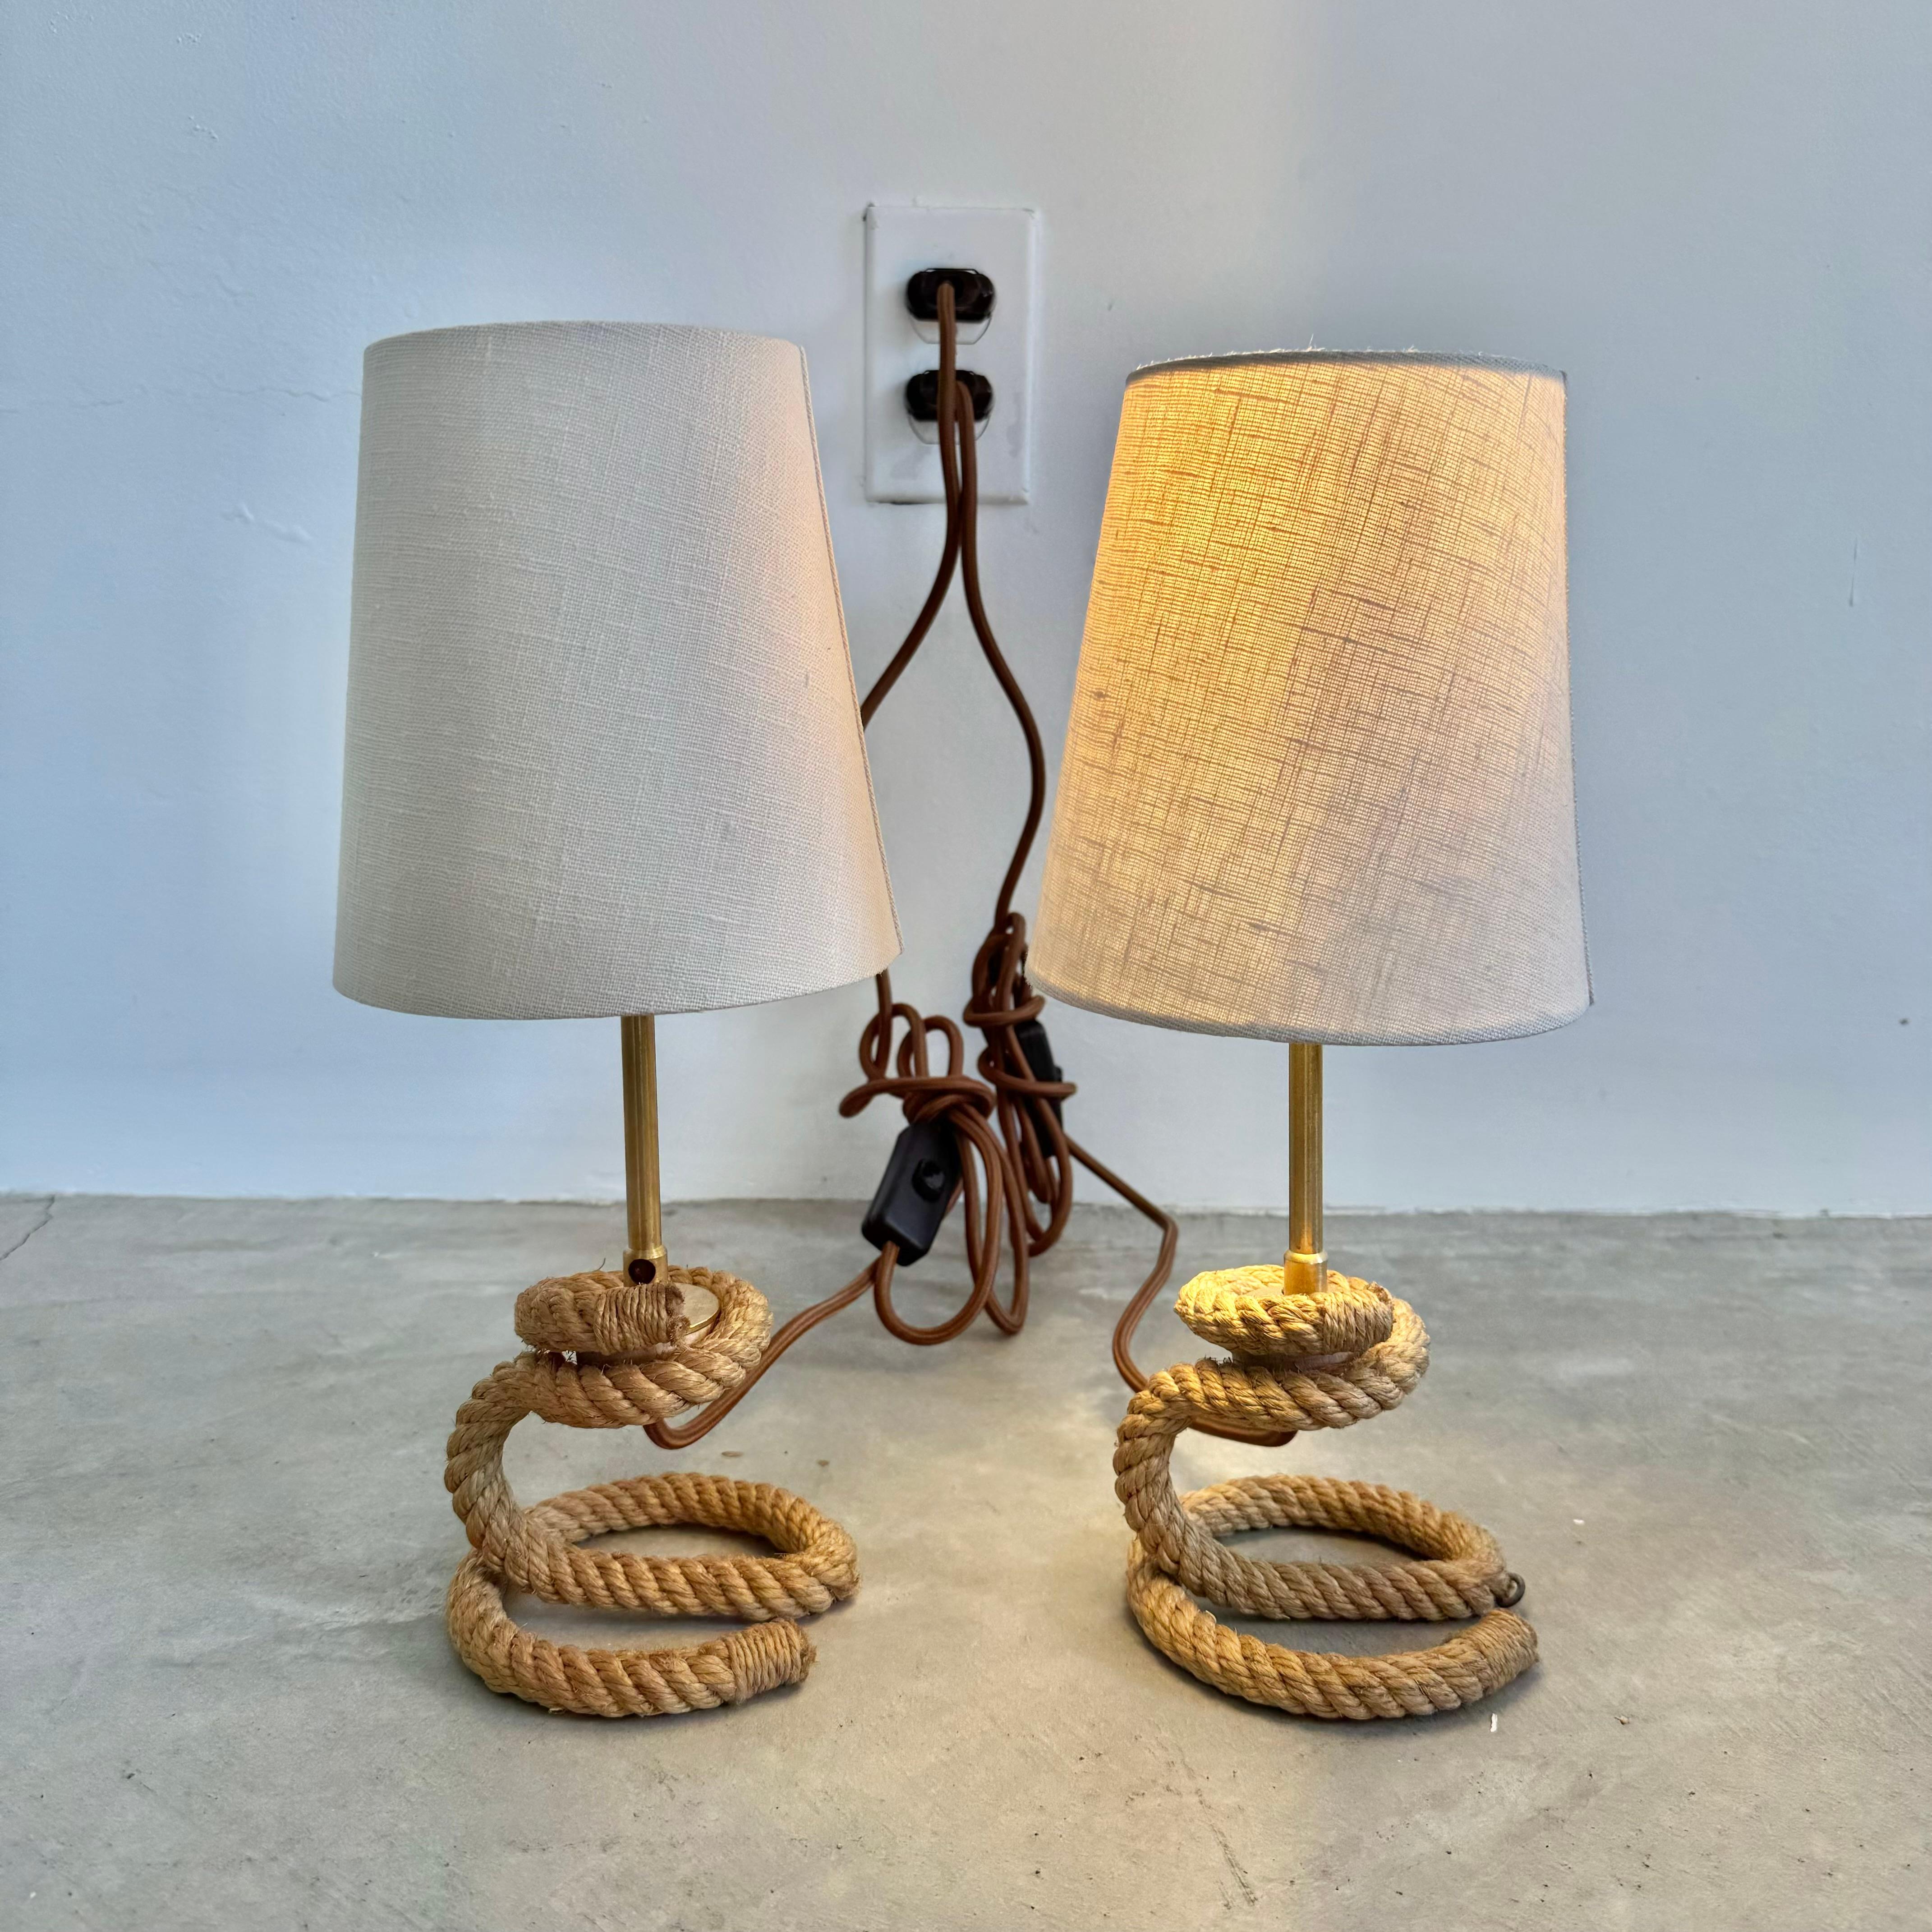 Sculptural pair of table lamps in twisted rope in the style of French designers Adrien Audoux and Frida Minet. Elegant details.  Brass hardware. Both ends of the rope base wrapped in twine. Rope base twists in a spiral getting larger at the base.